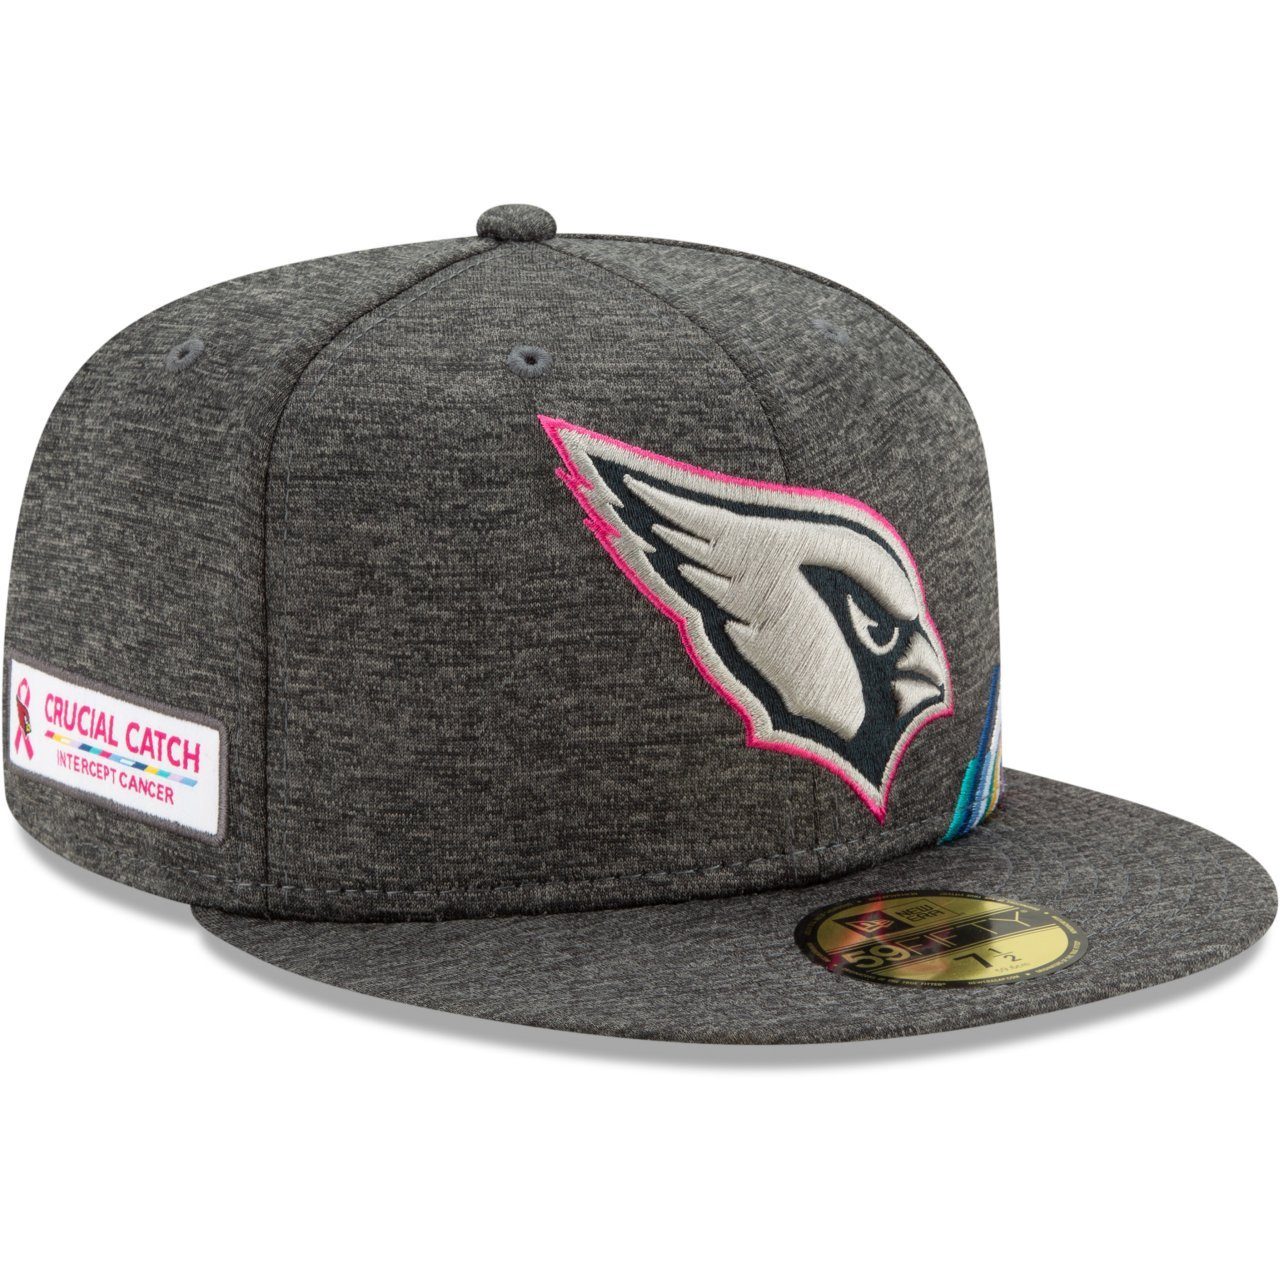 Fitted New CRUCIAL Era Arizona NFL Teams Cap Cardinals CATCH 59Fifty